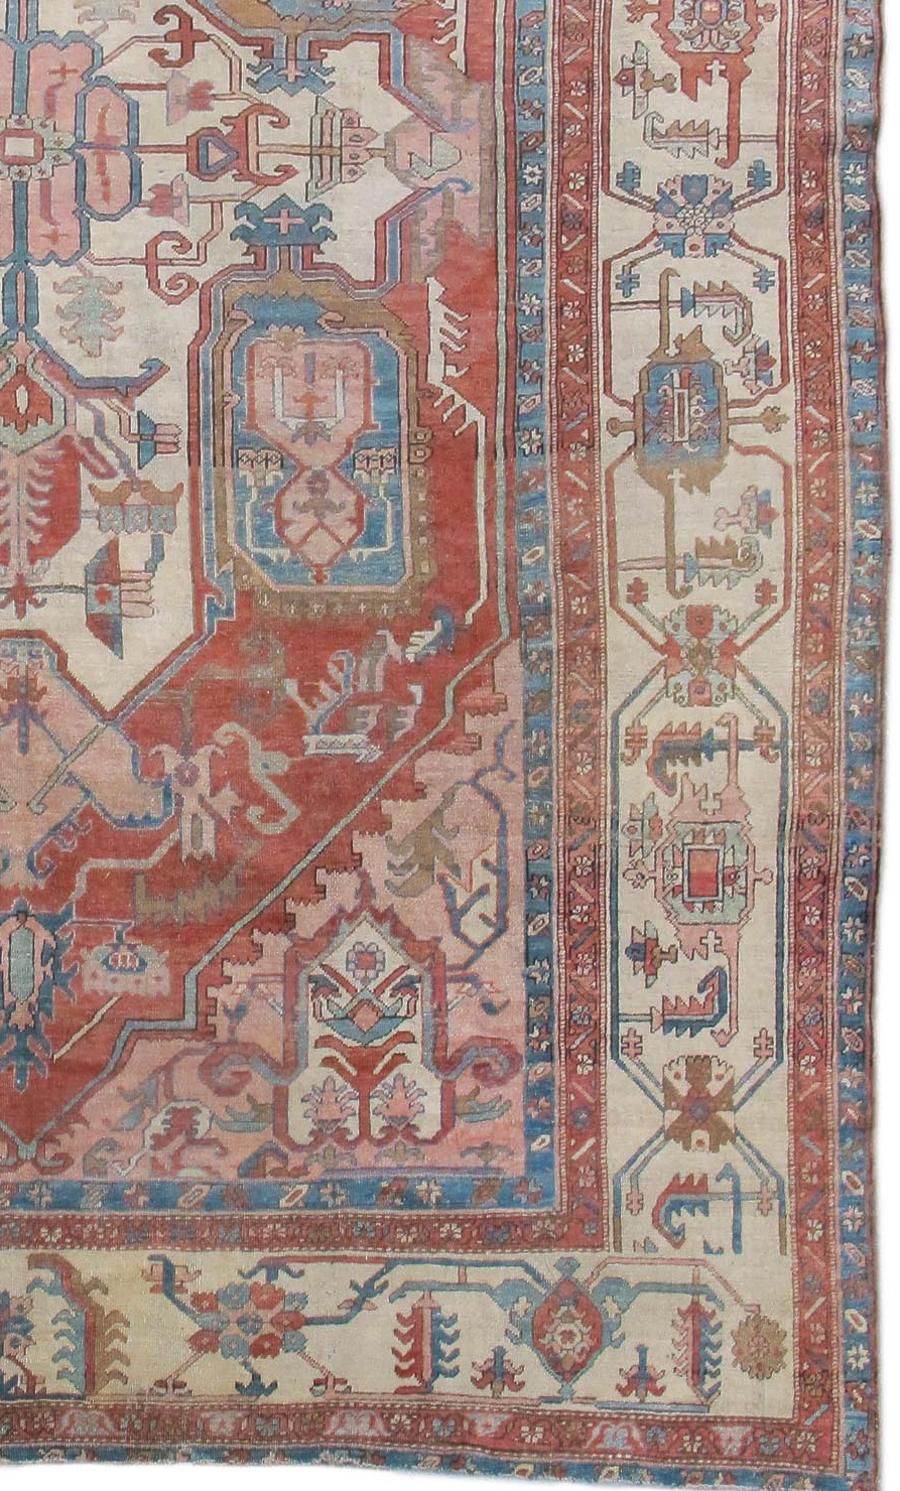 Serapi carpets from the Heriz district of Northwest Persia are known for their blending of bold graphics with a more traditional and elegant format. This Serapi draws a grand central medallion that takes up nearly the entire field. The sparse, terra